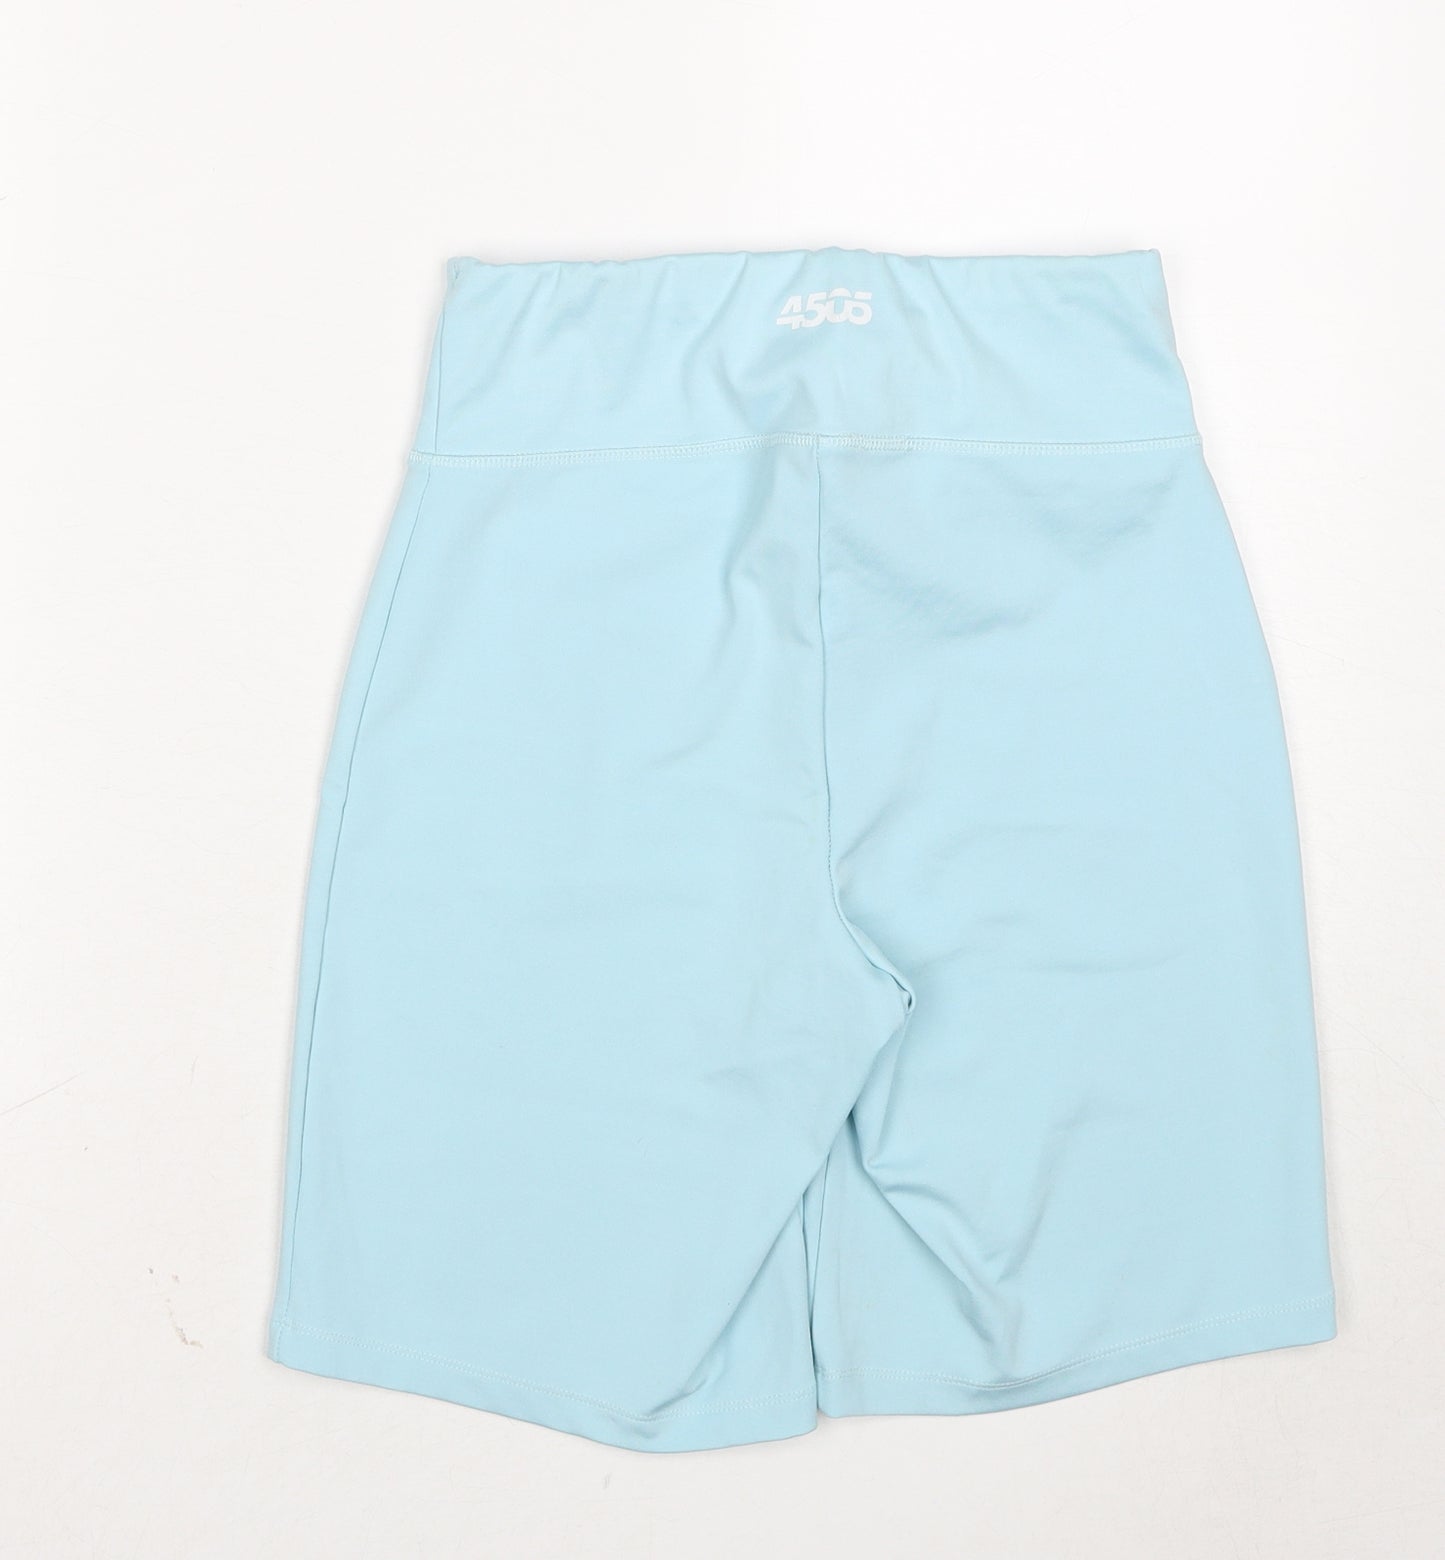 ASOS Womens Blue Polyester Compression Shorts Size 12 Regular